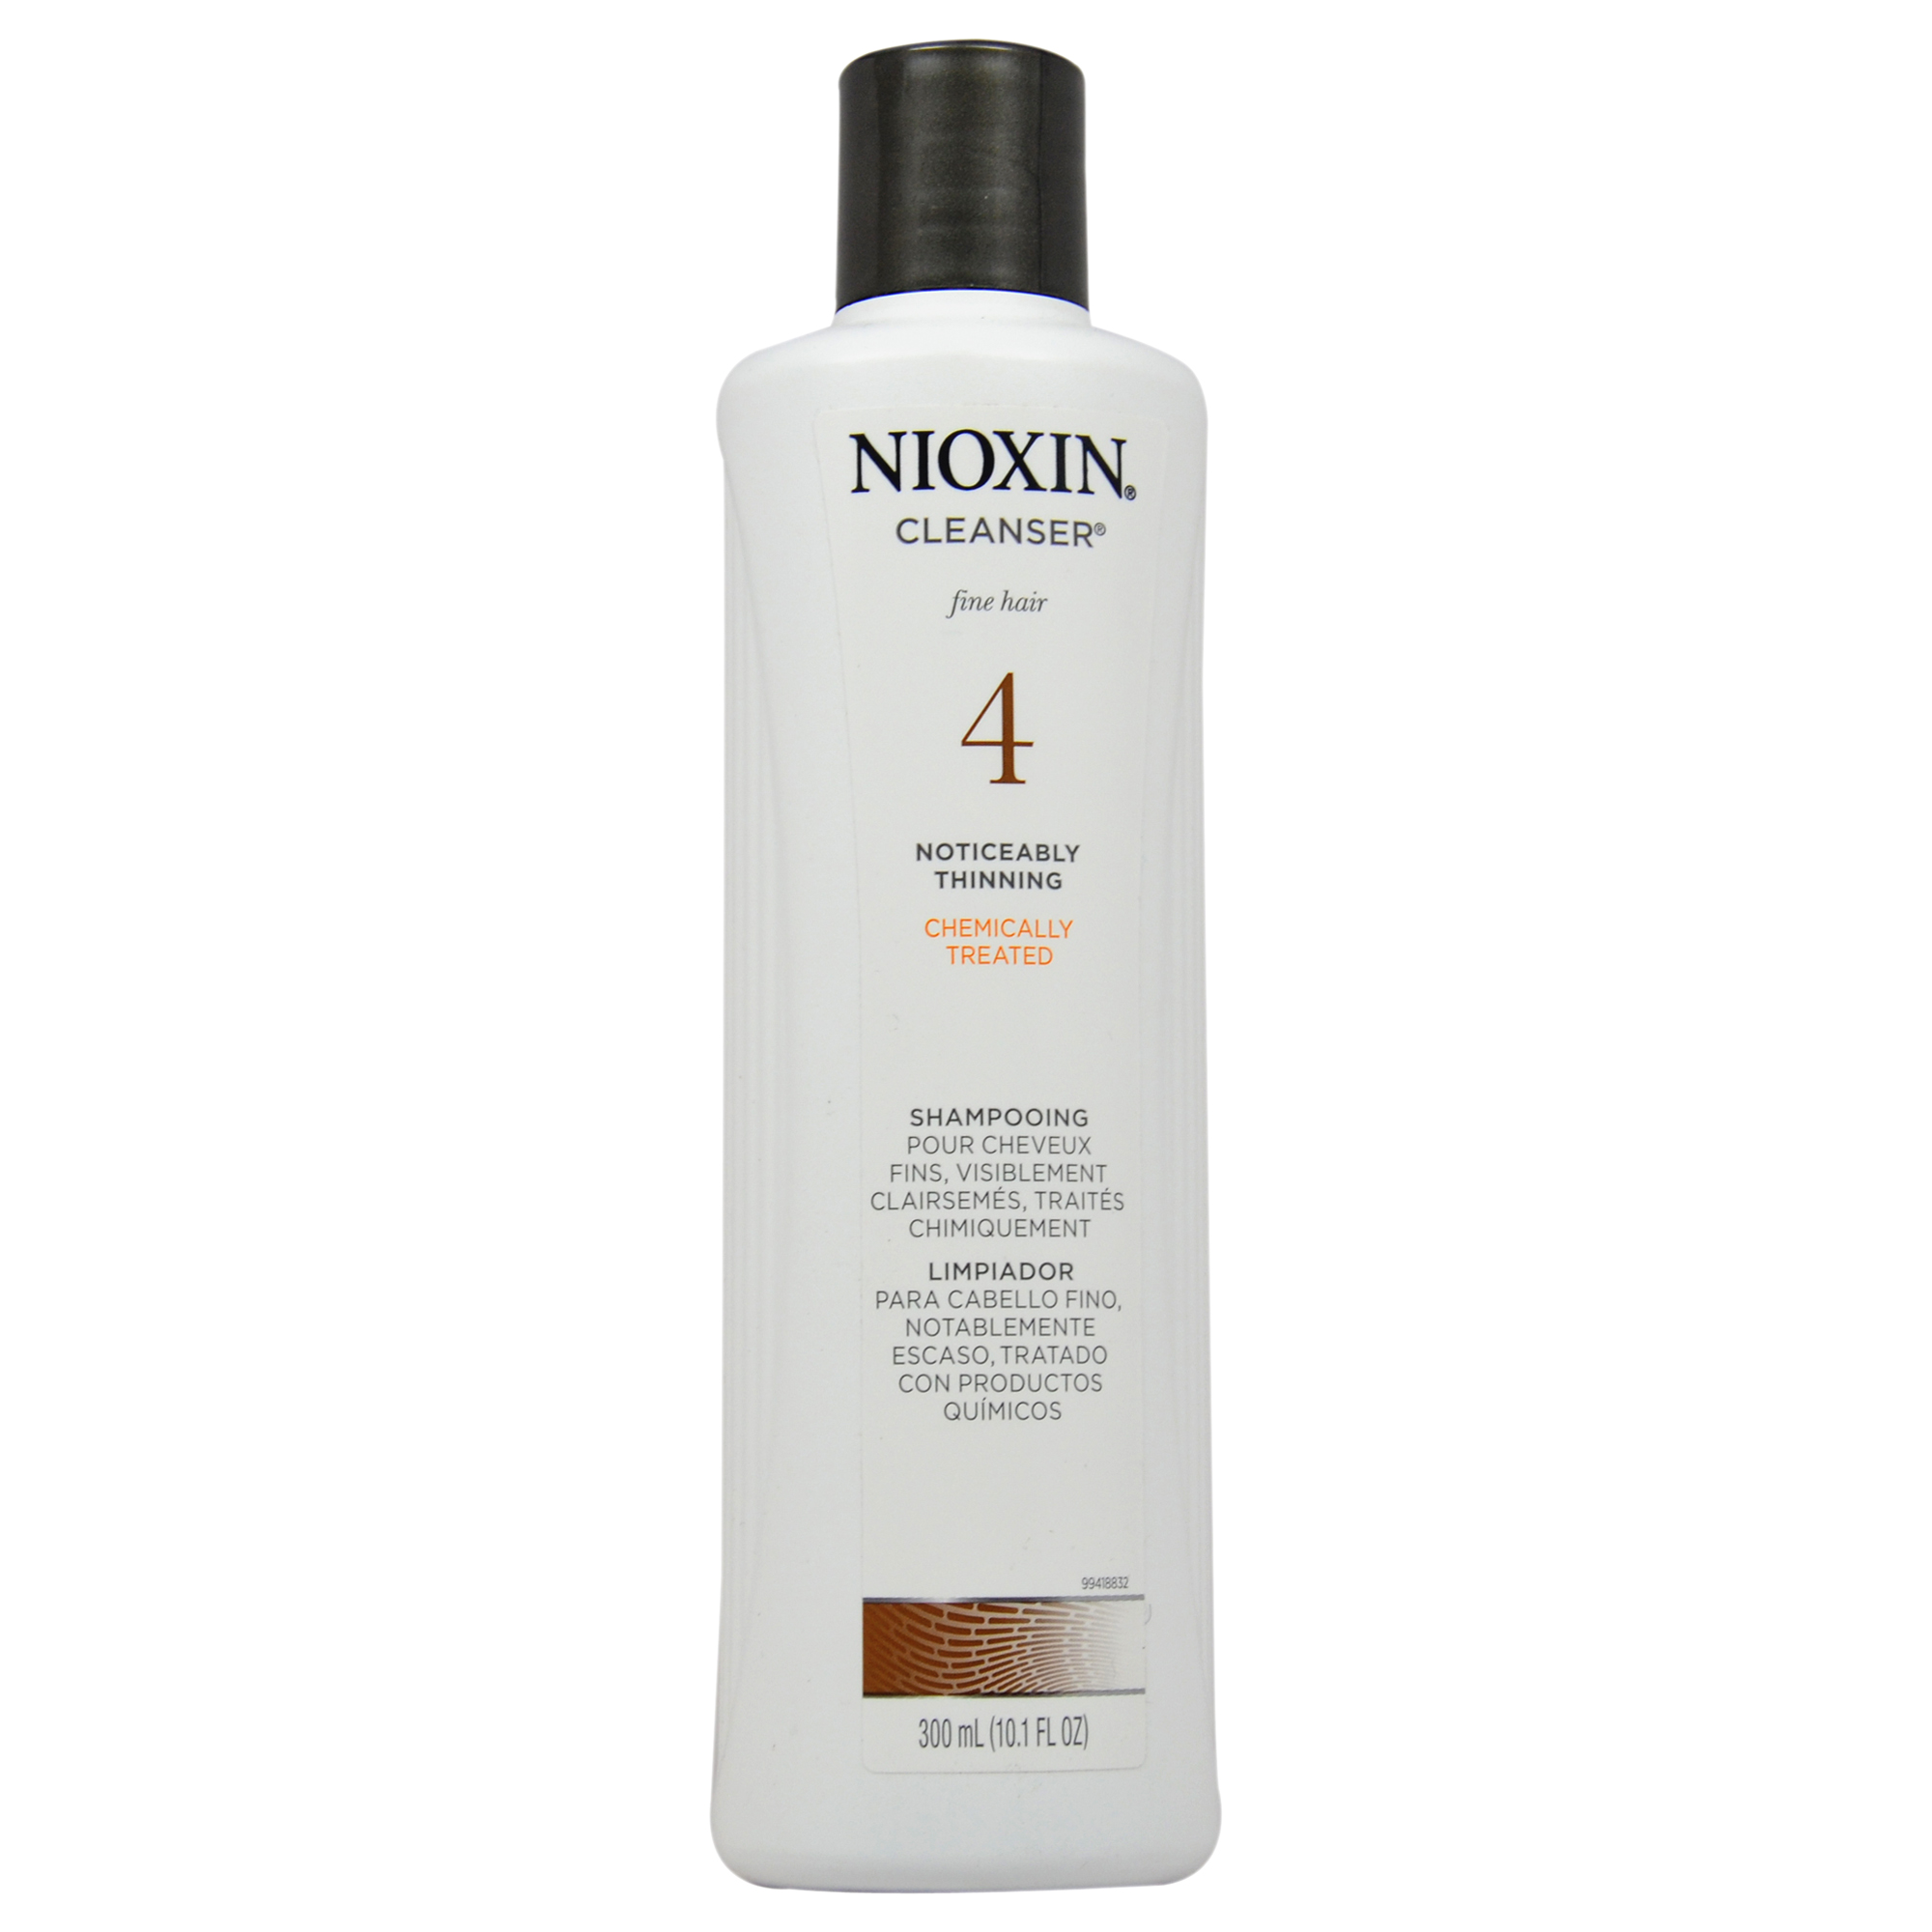 Nioxin System 4 Cleanser For Fine Hair Noticeably Thinning Chemically Treated